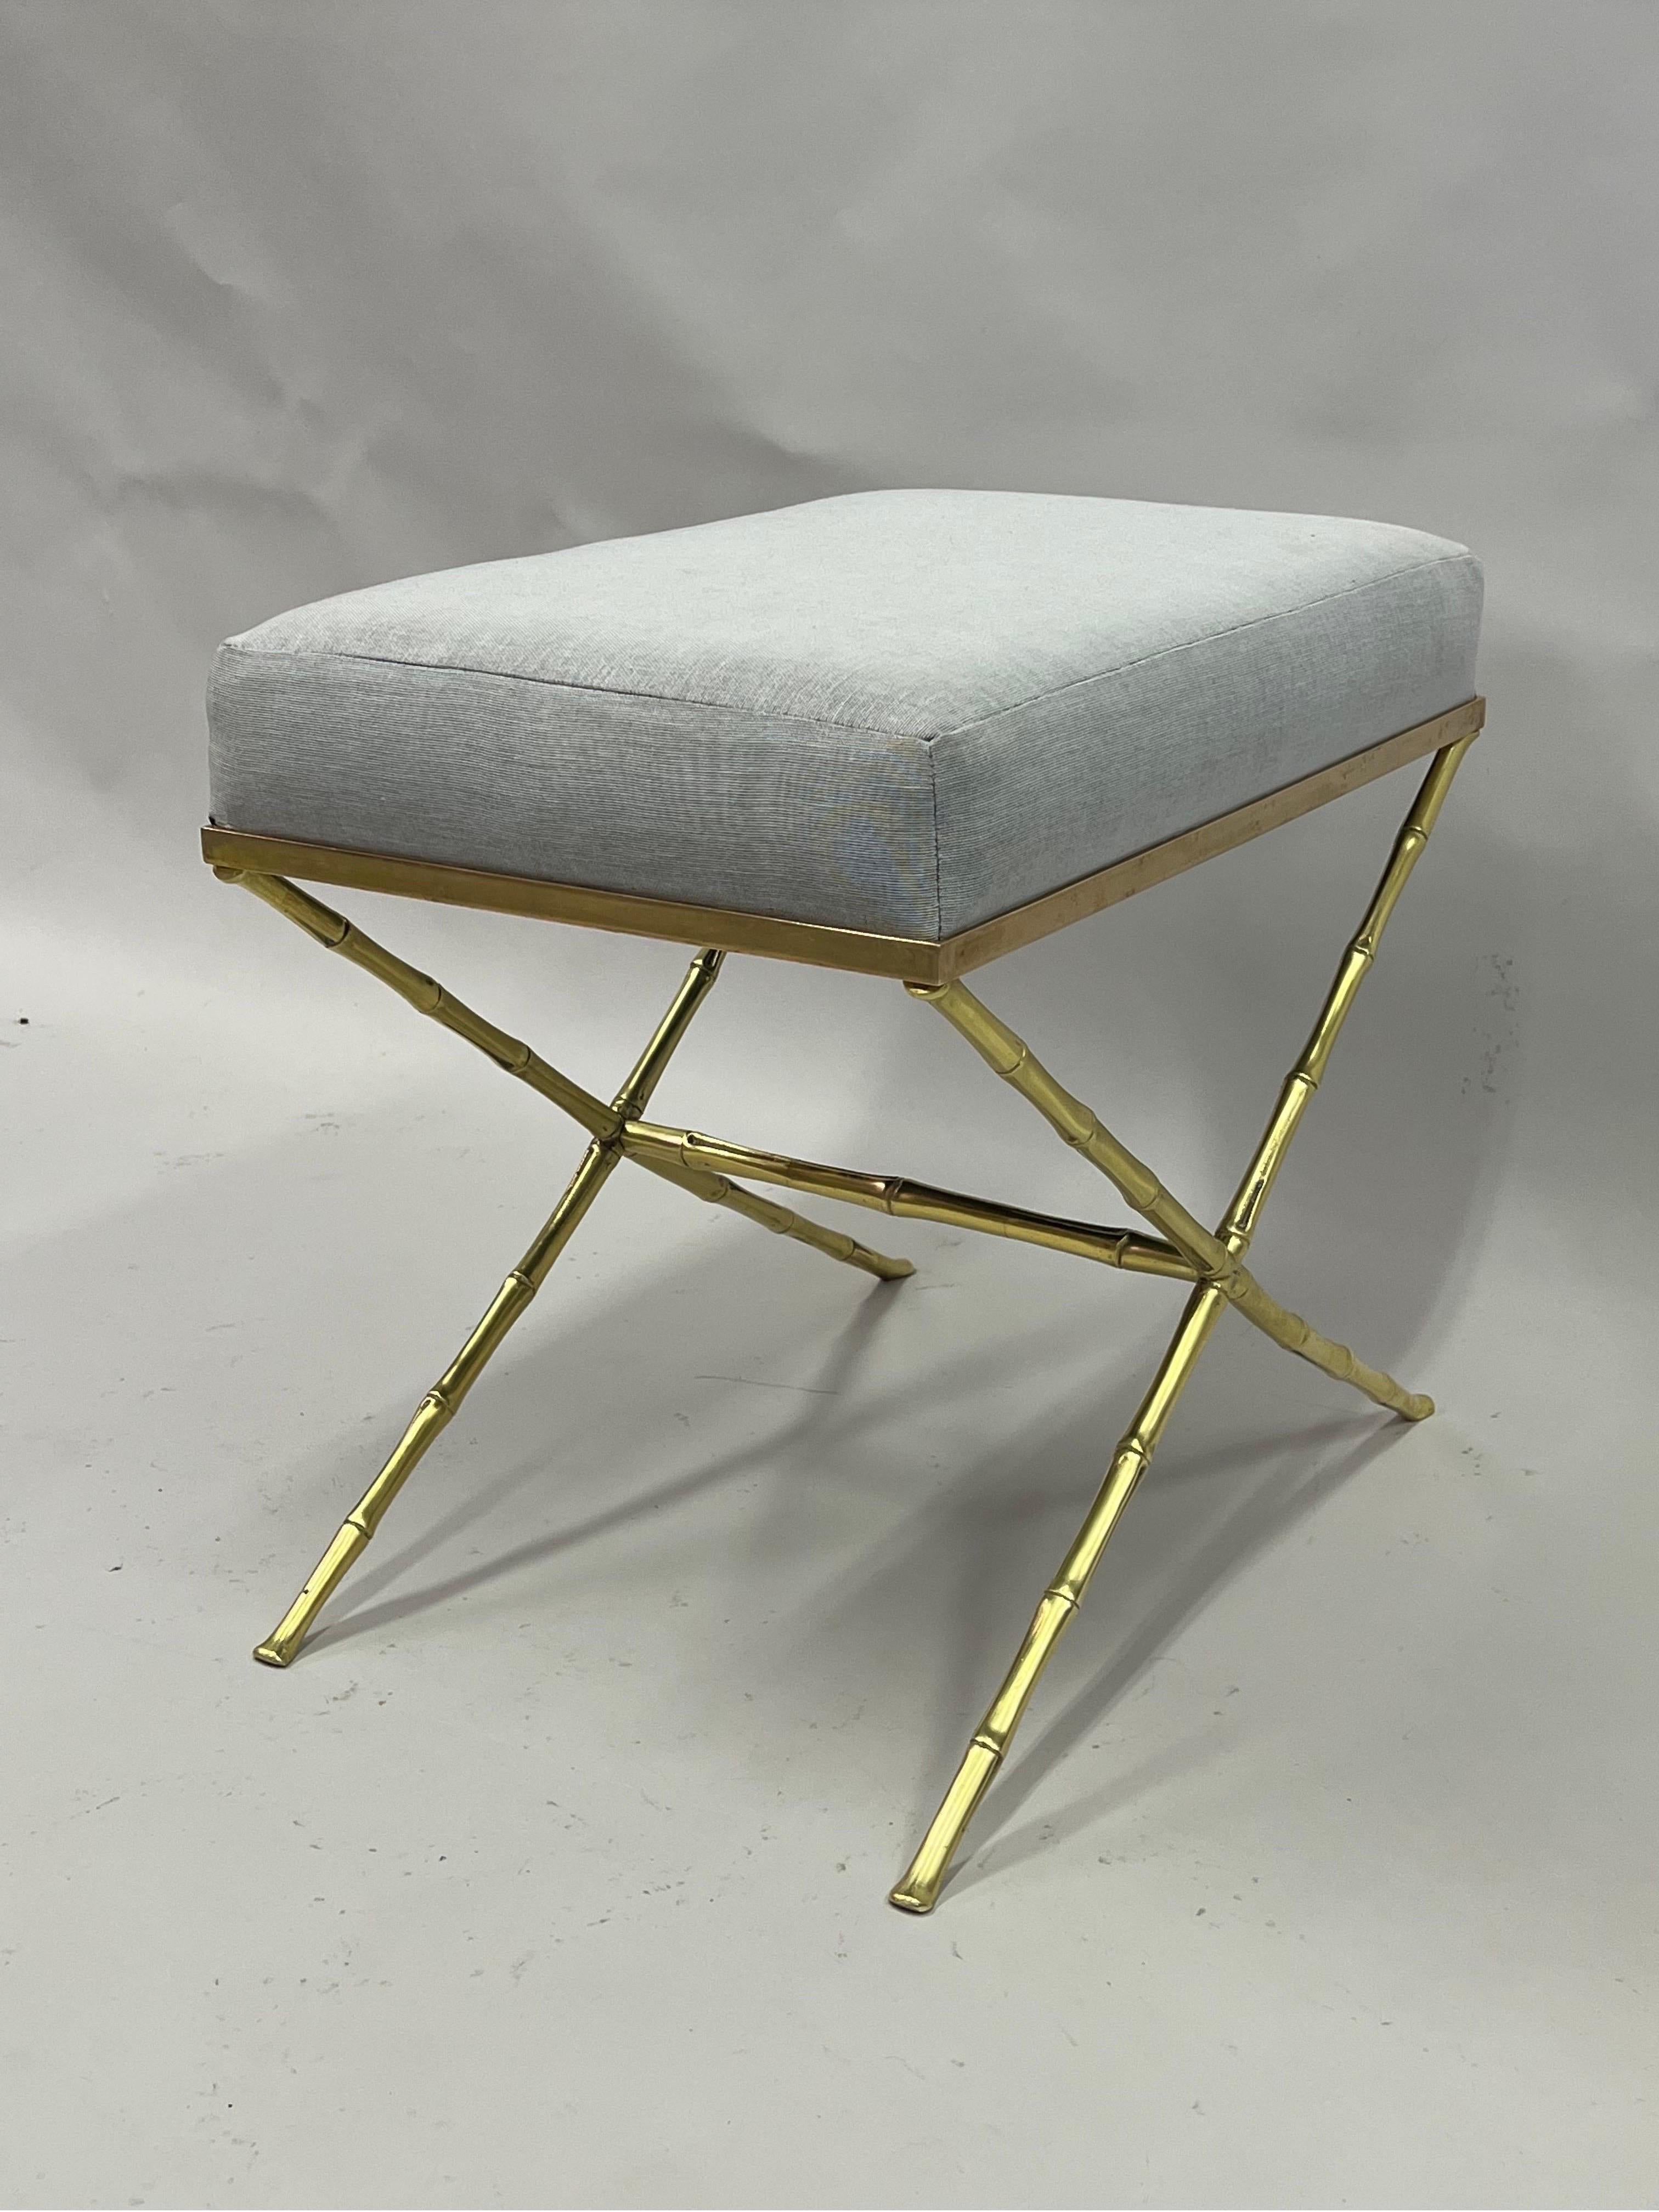 20th Century French Mid-Century Modern Neoclassical Brass Faux Bamboo Bench by Maison Baguès For Sale